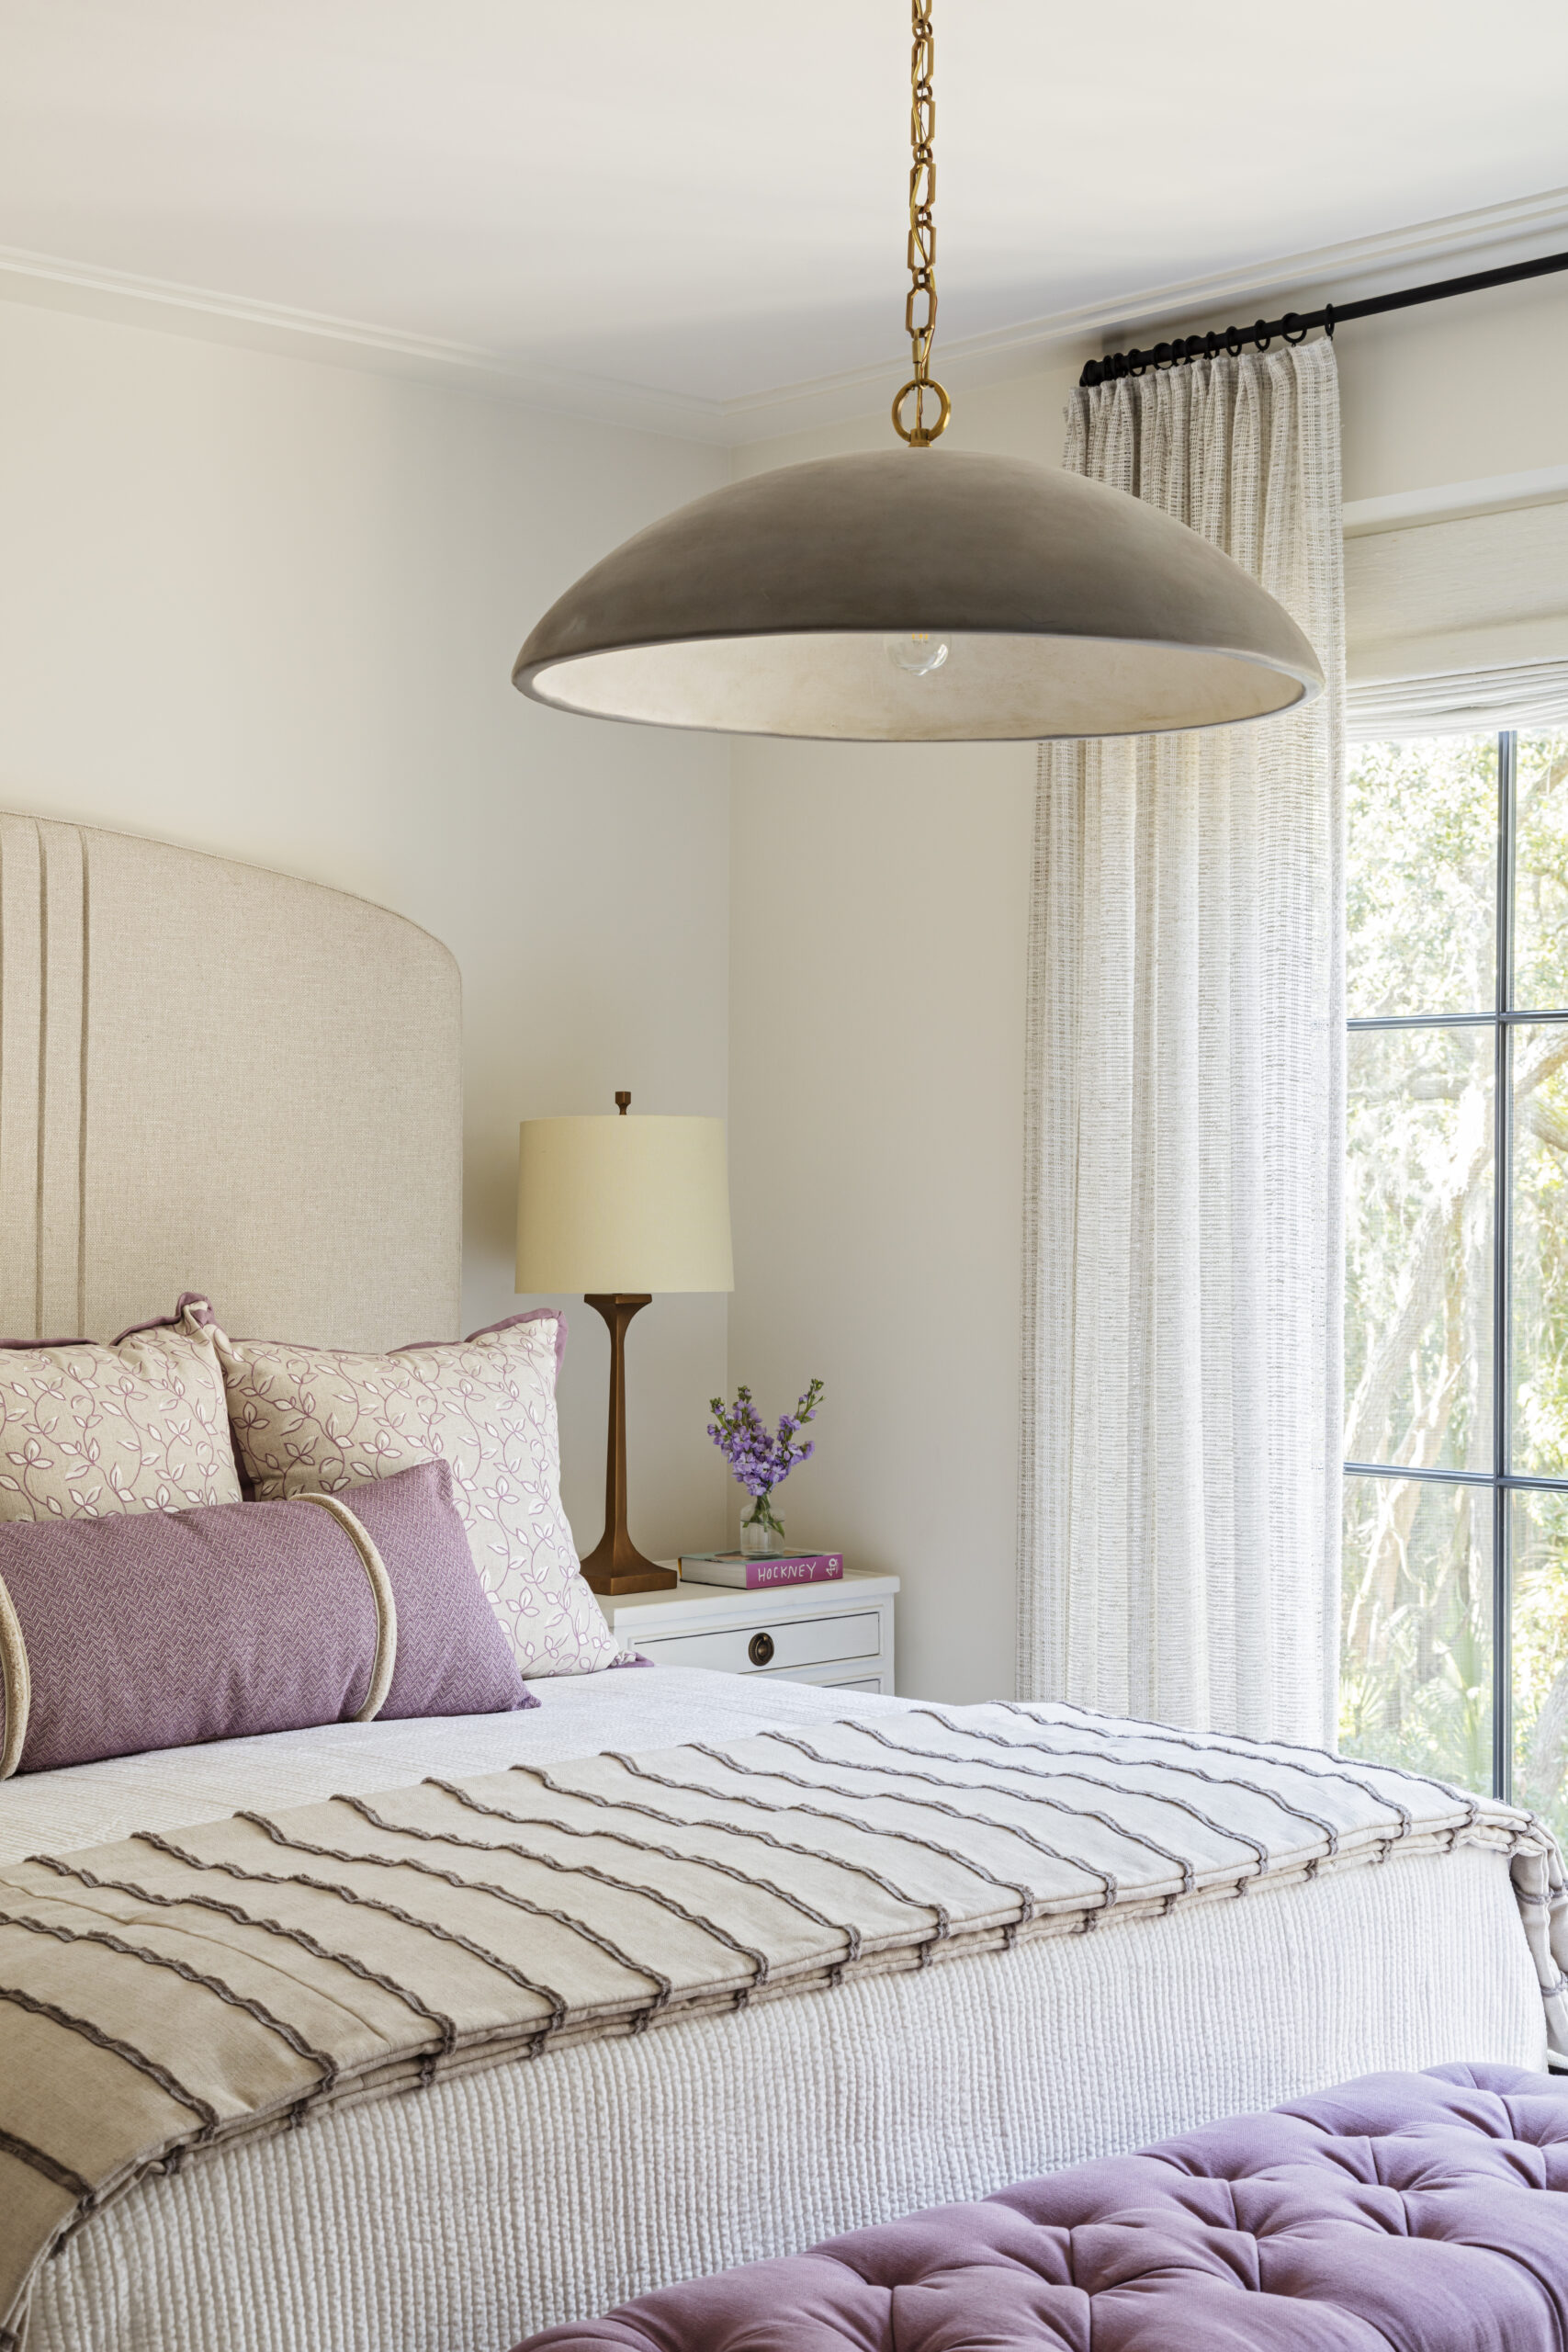 Home tour featuring bedroom with neutral color palette with lilac in transitional style designed by Margaret Donaldson